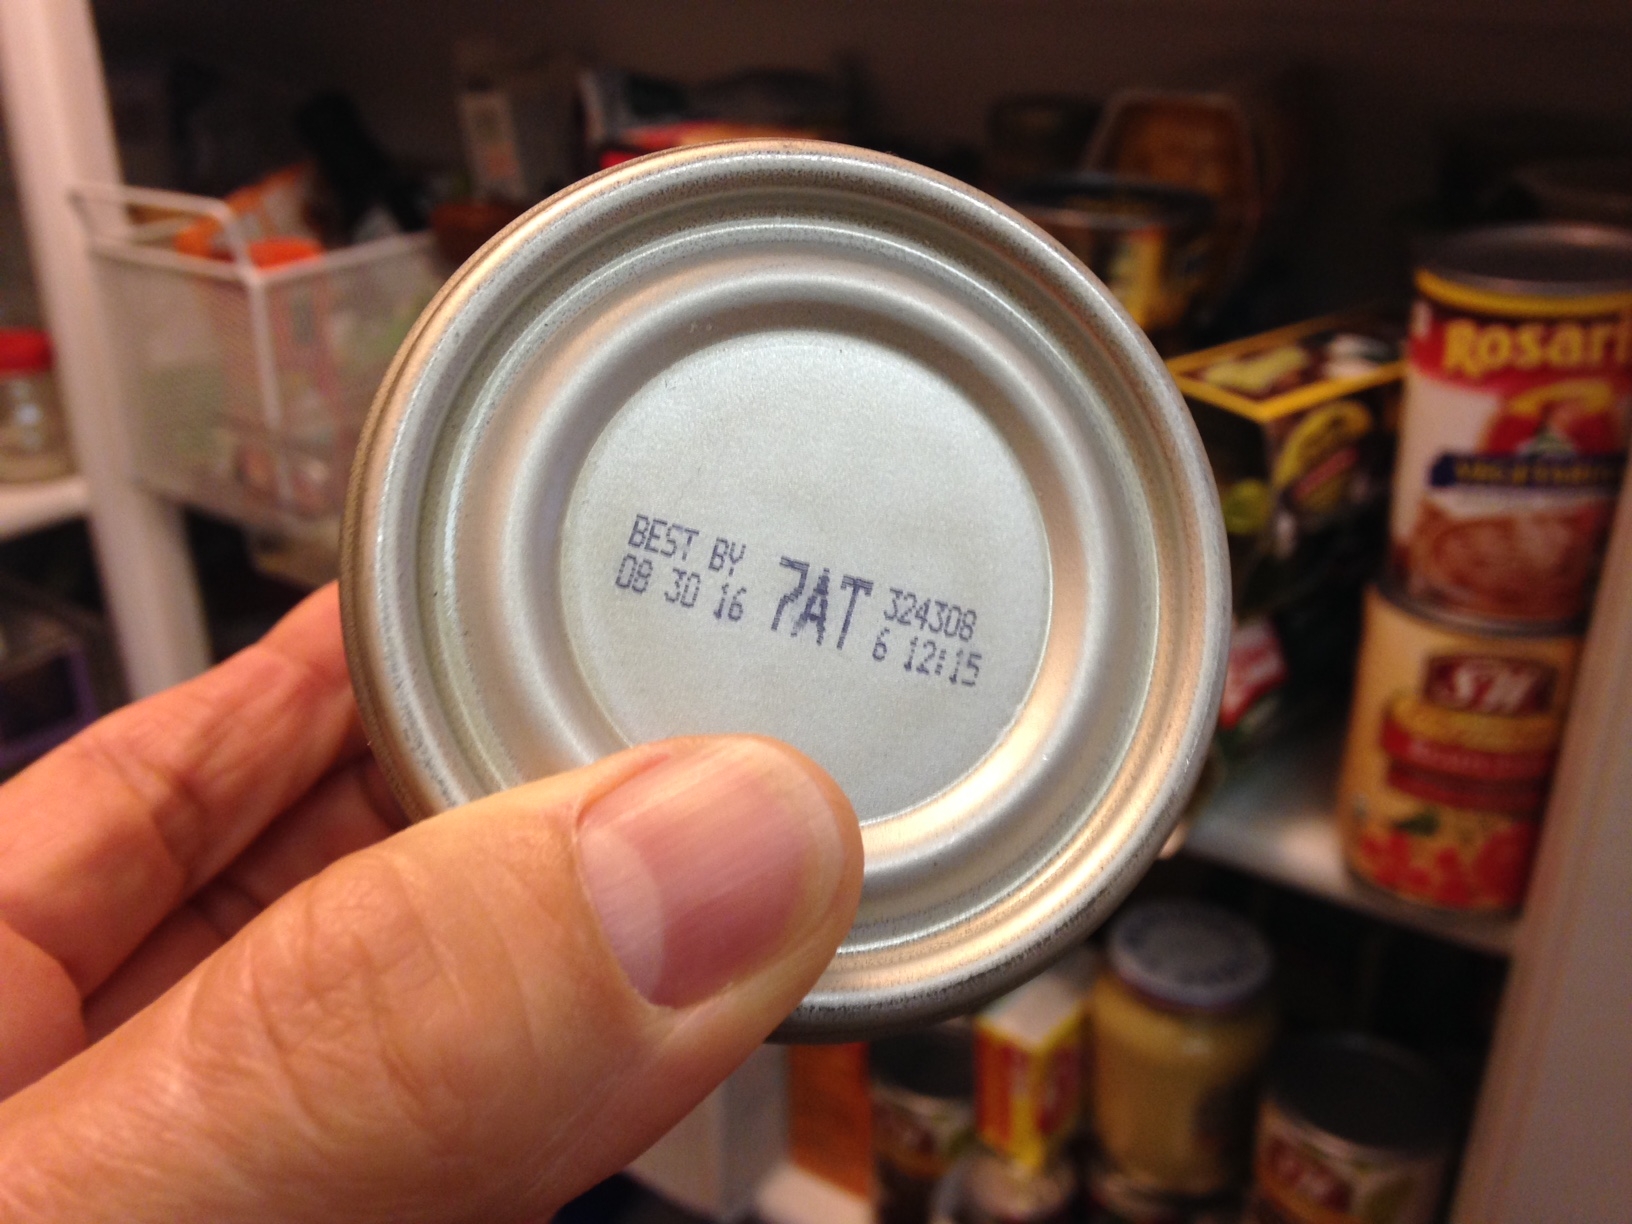 Date label confusion leads to food waste - Food Blog - ANR Blogs